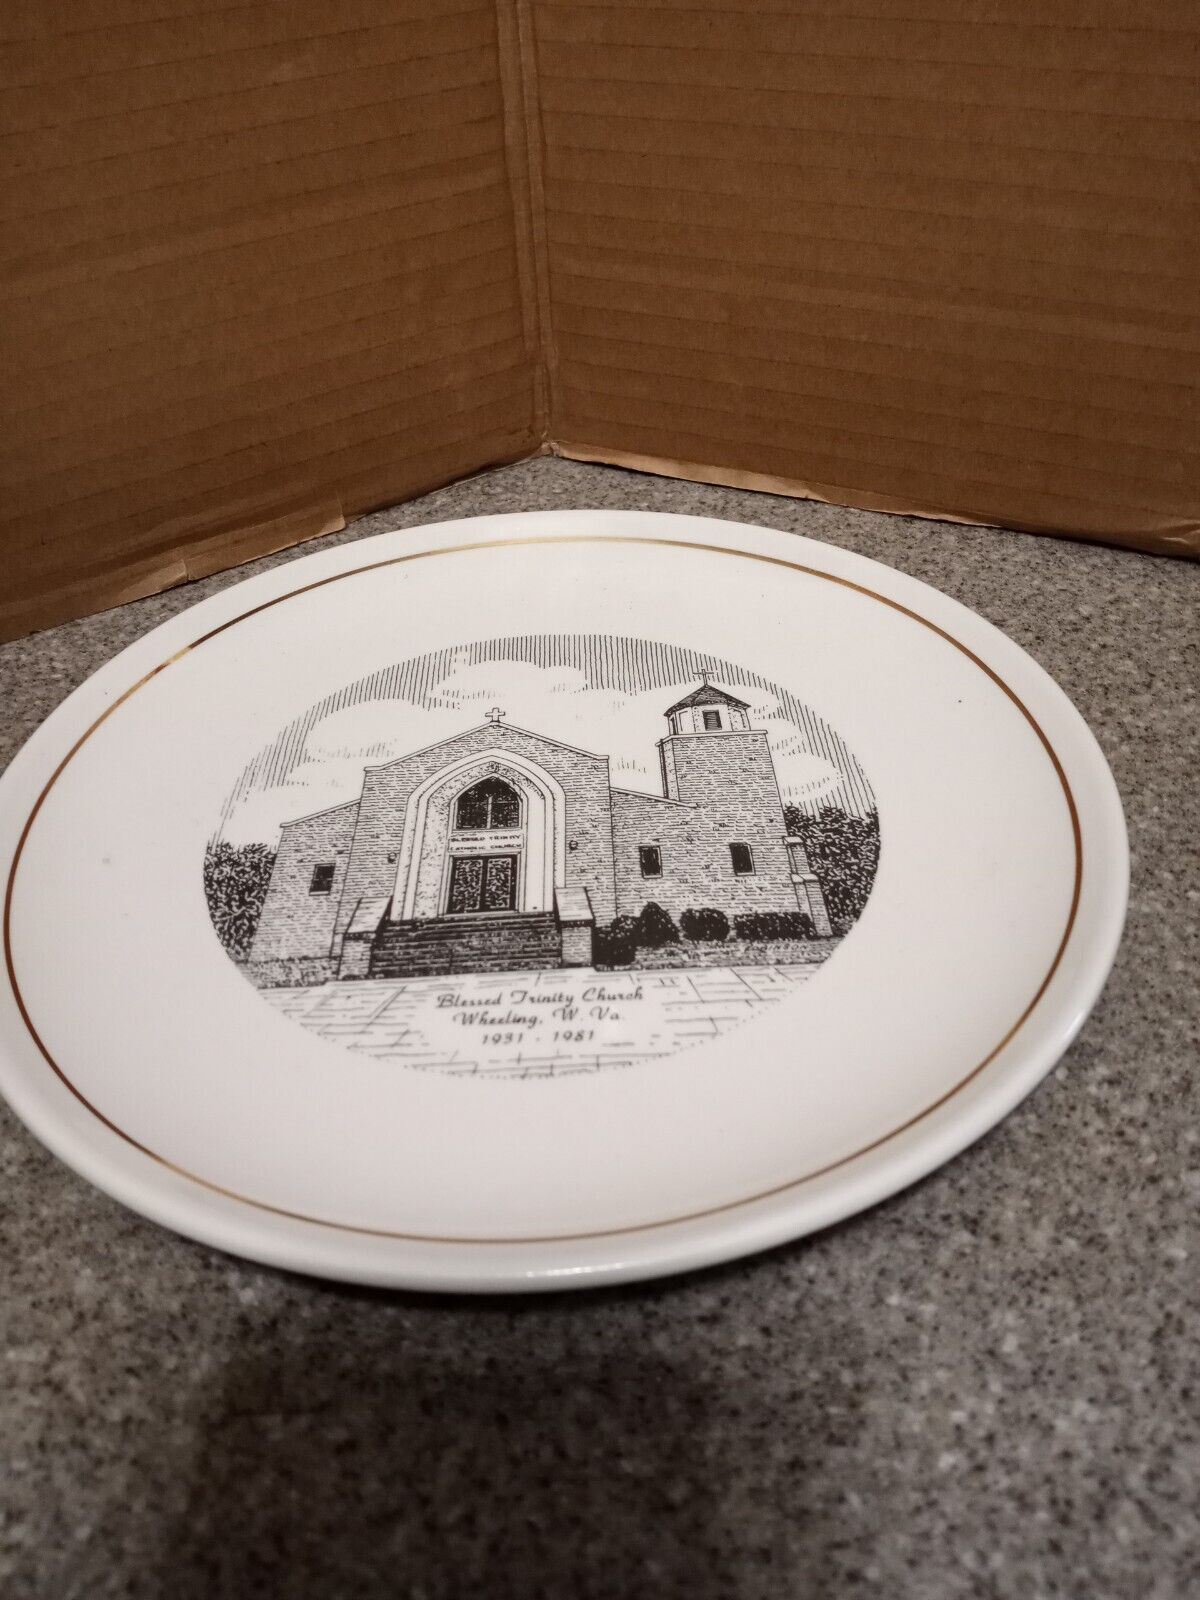 Blessed Trinity Church, Wheeling, WV 1931-1981 collector plate